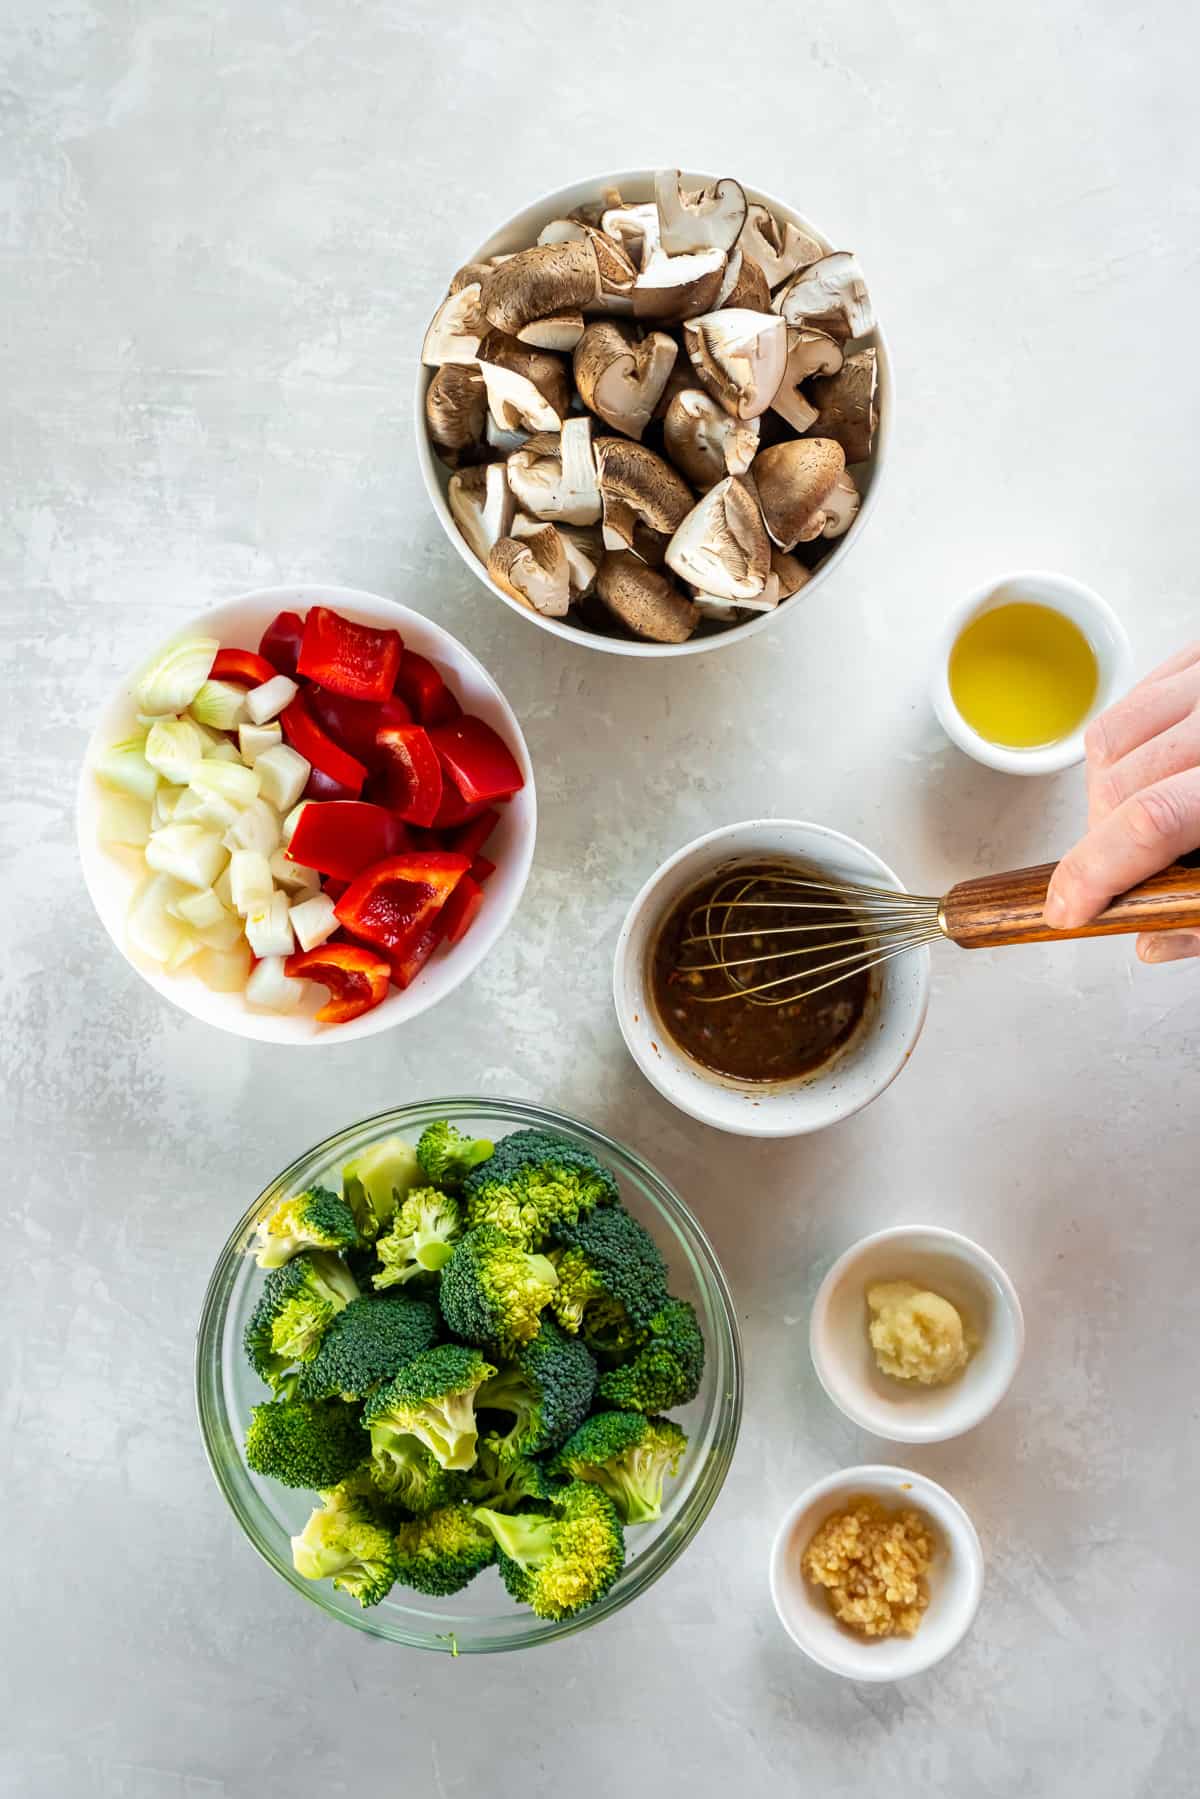 A hand whisking stir fry sauce in a small bowl surrounded by broccoli, mushrooms and other ingredients in bowls.